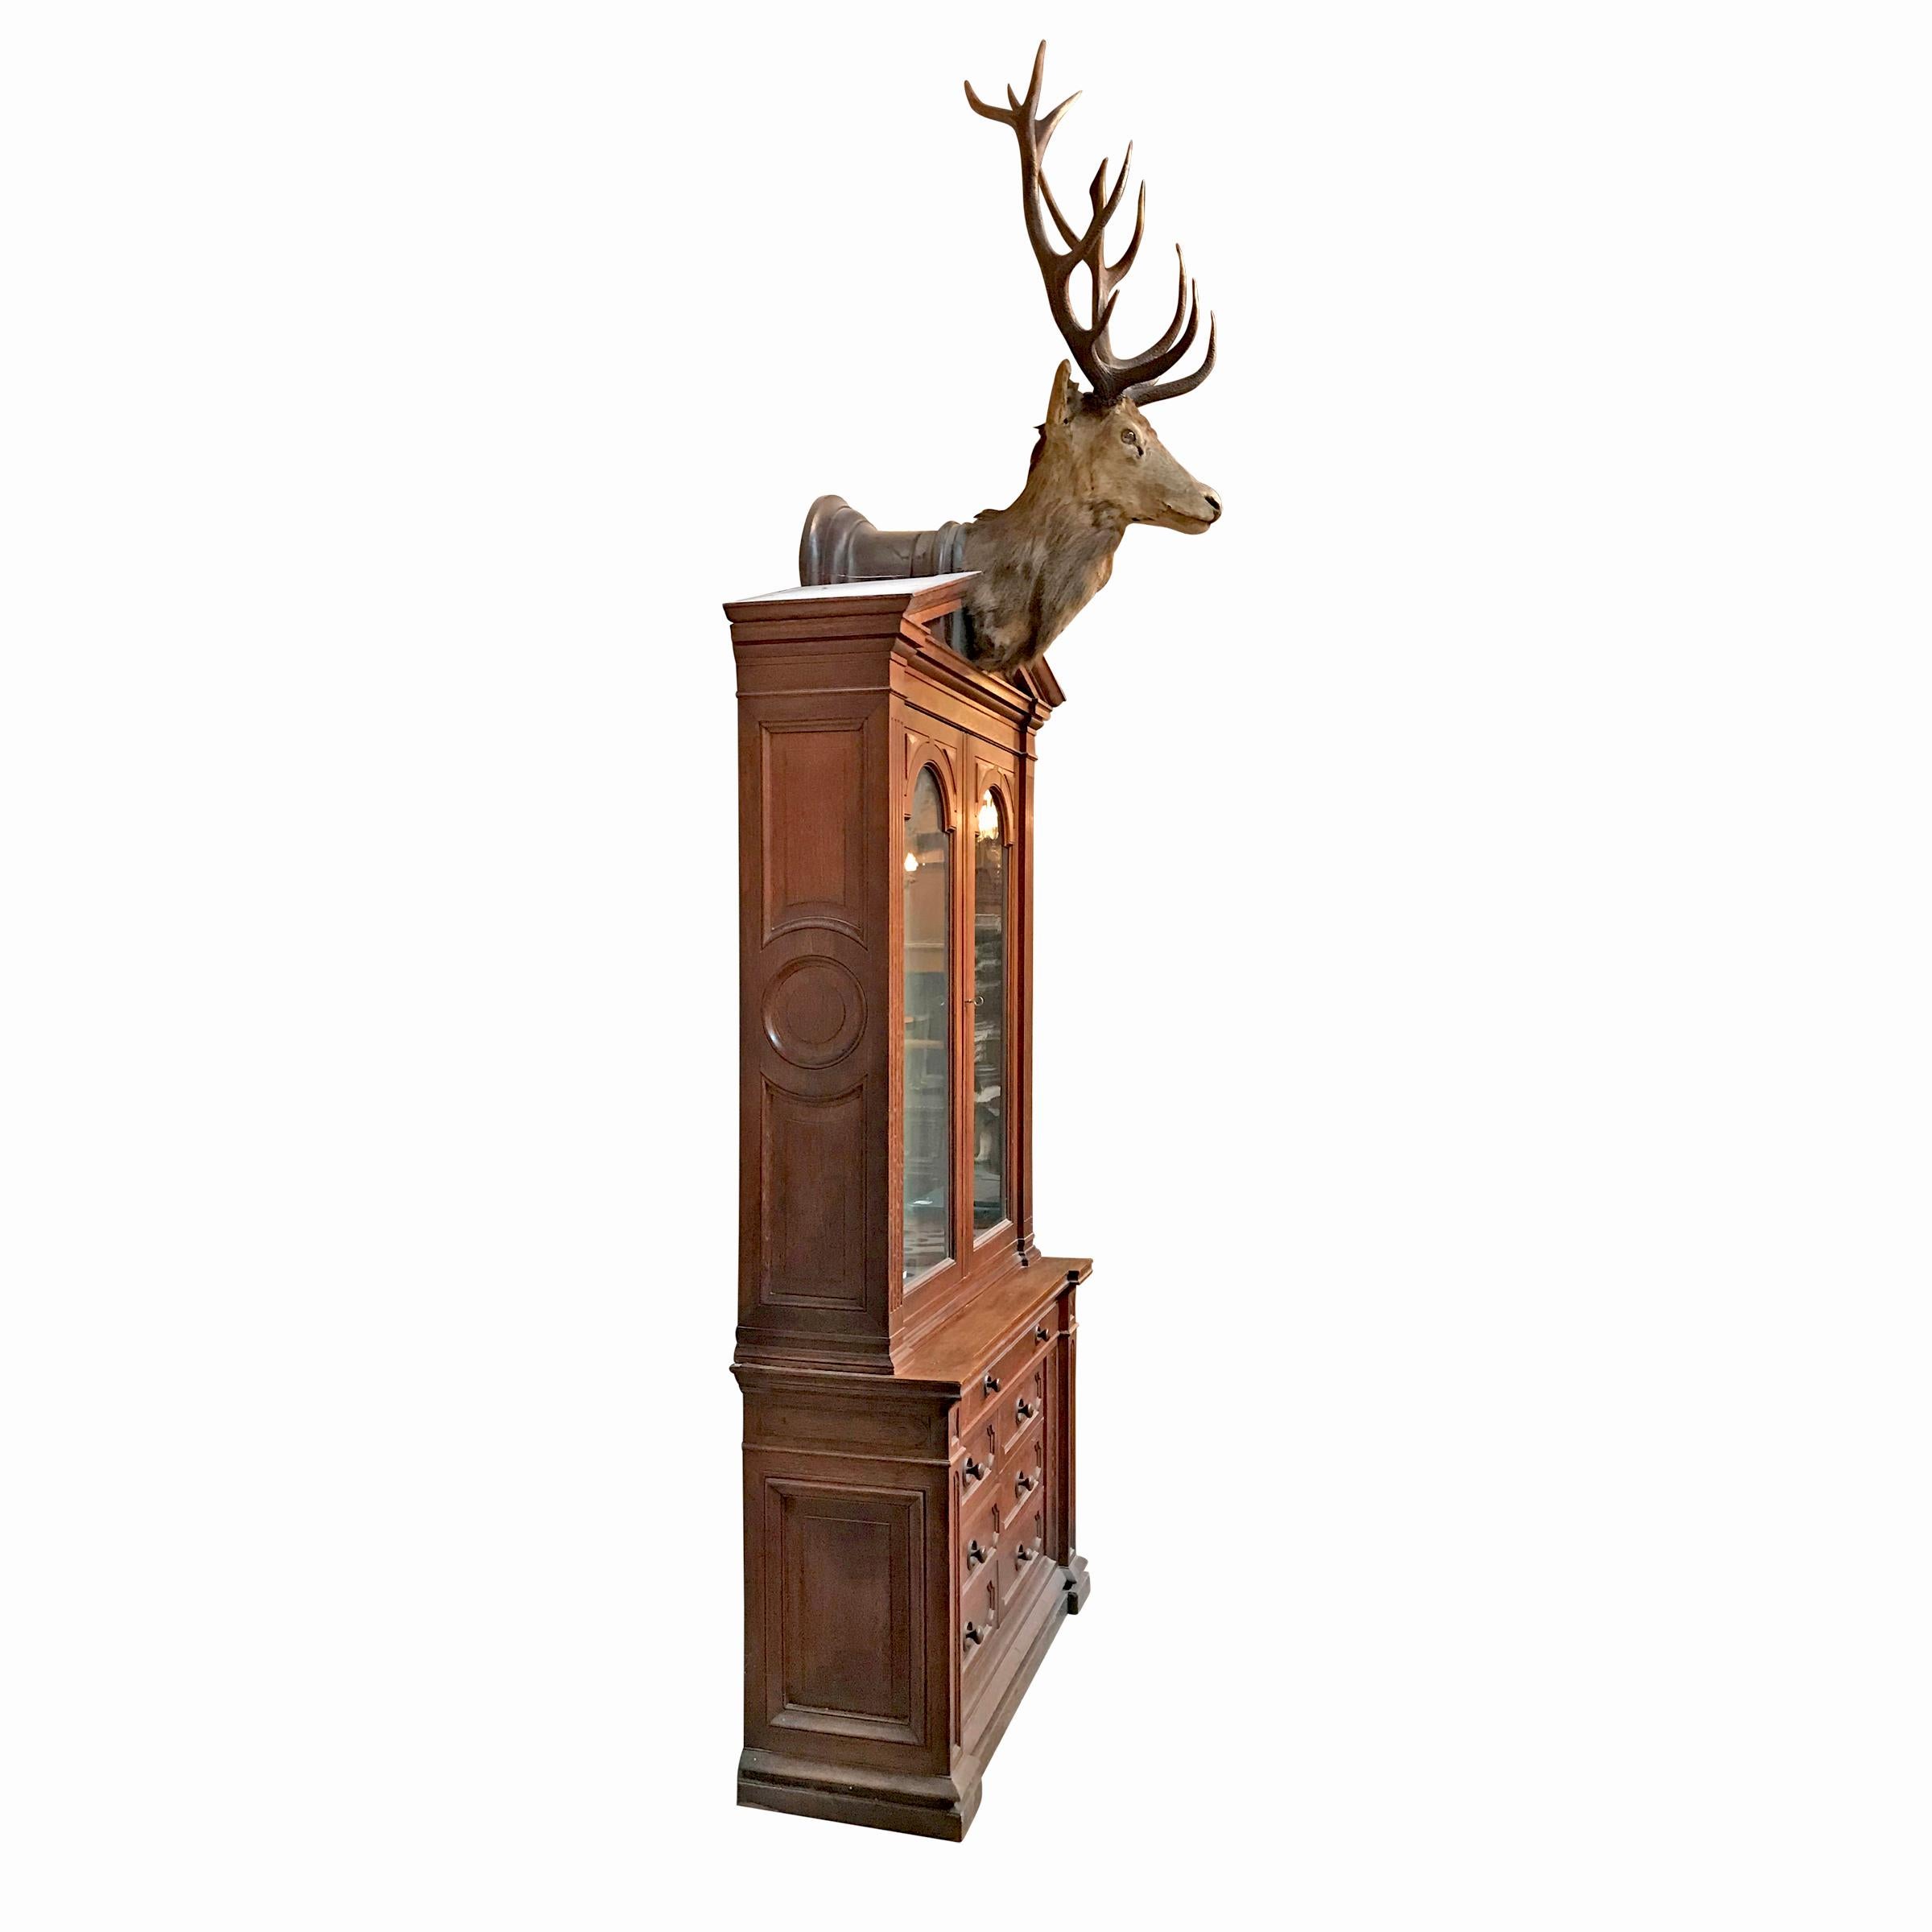 A fantastic late 19th century German oak breakfront gun cabinet with a large thirteen-point stag head trophy mount fitted to the classical Grecian pediment. The cabinet was built by German cabinet maker Carl Hottenroth. The cabinet features two